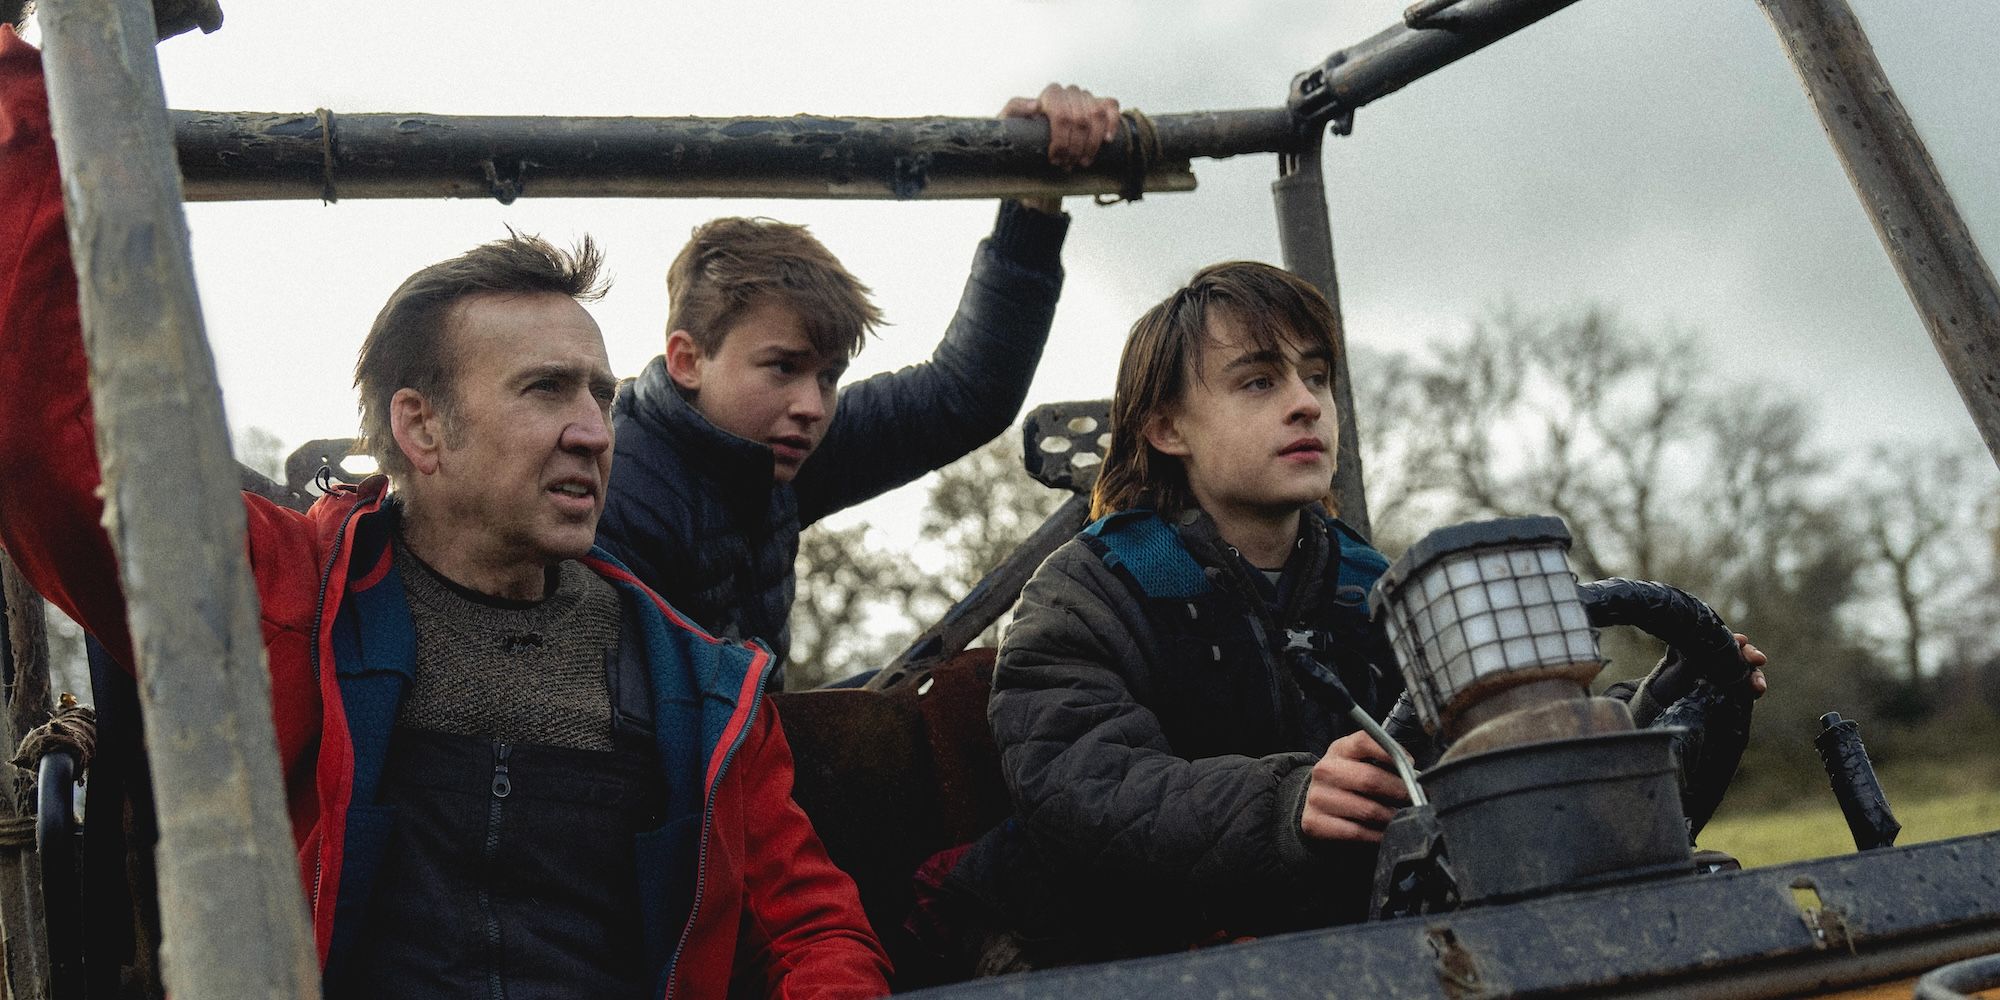 Nicolas Cage rides in a truck with his onscreen sons in Arcadian movie still